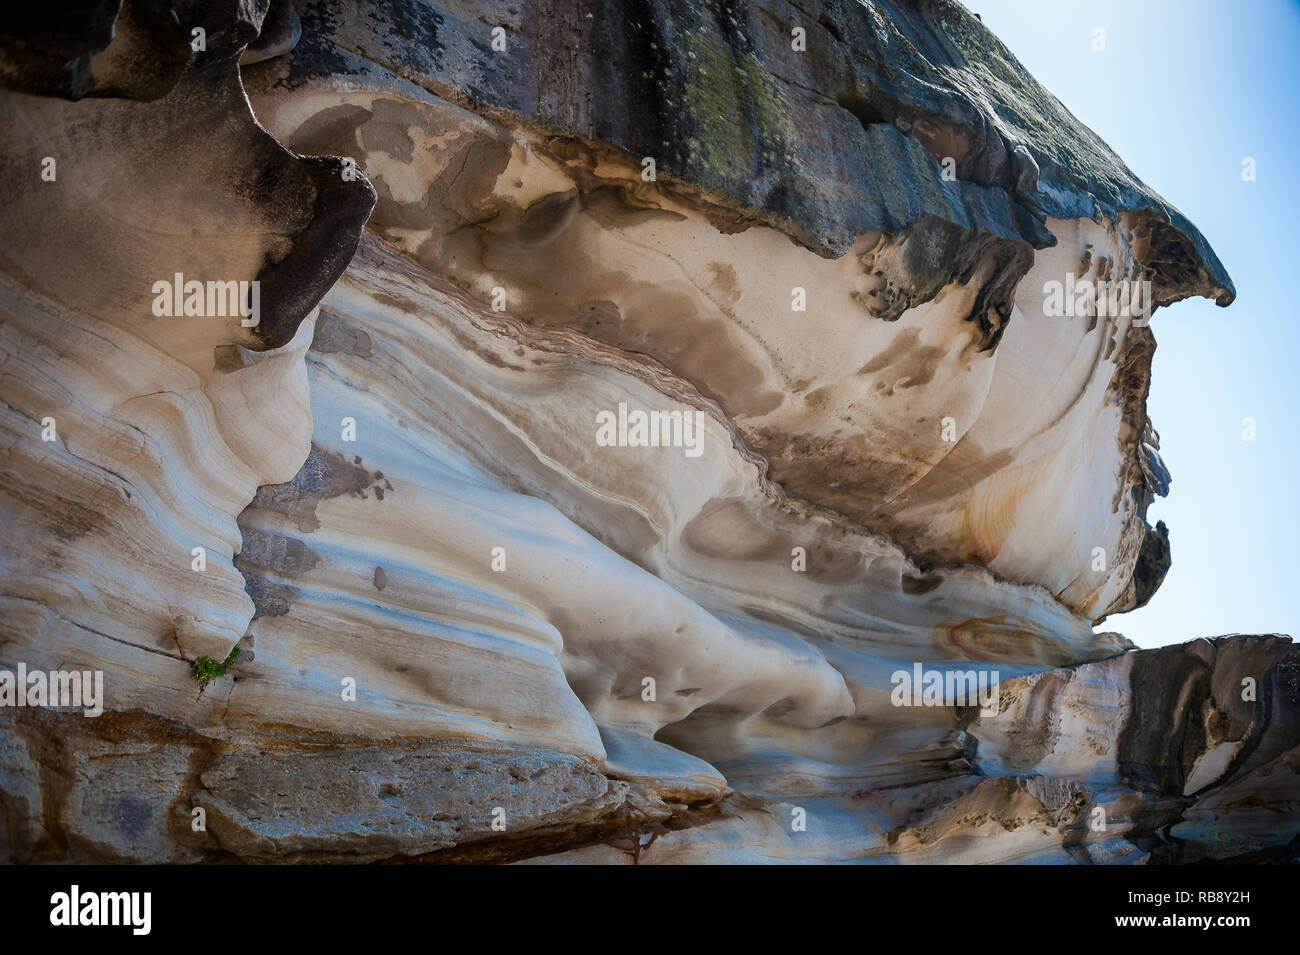 Rock formations eroded by wind and water along the Bondi to Coogee cliff walk in Sydney's Eastern suburbs, Australia. Stock Photo